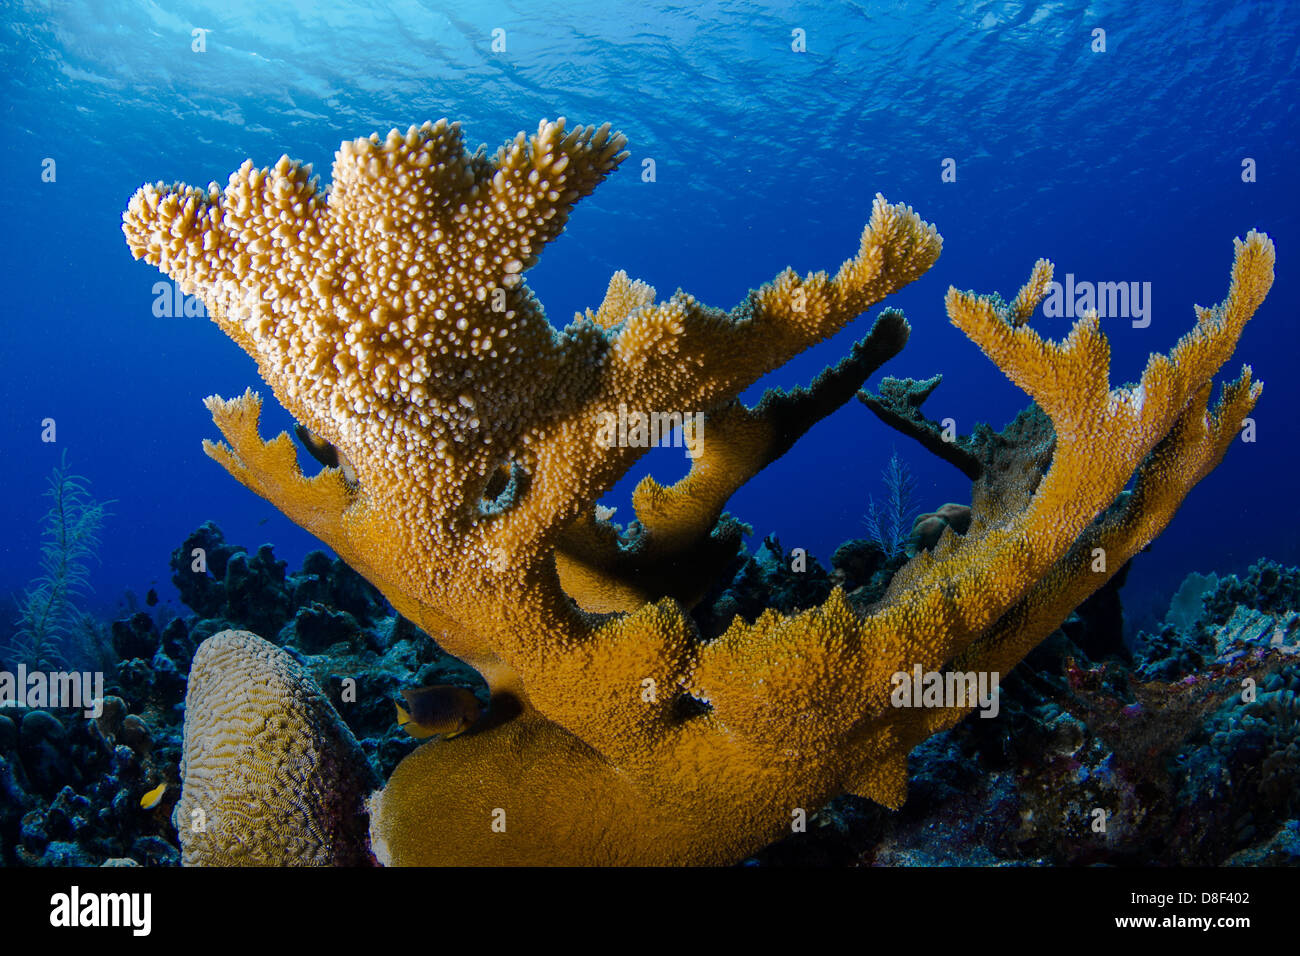 New growth pictured  on a branch of a large elkhorn coral patch off Lighthouse Reef in Belize. Stock Photo